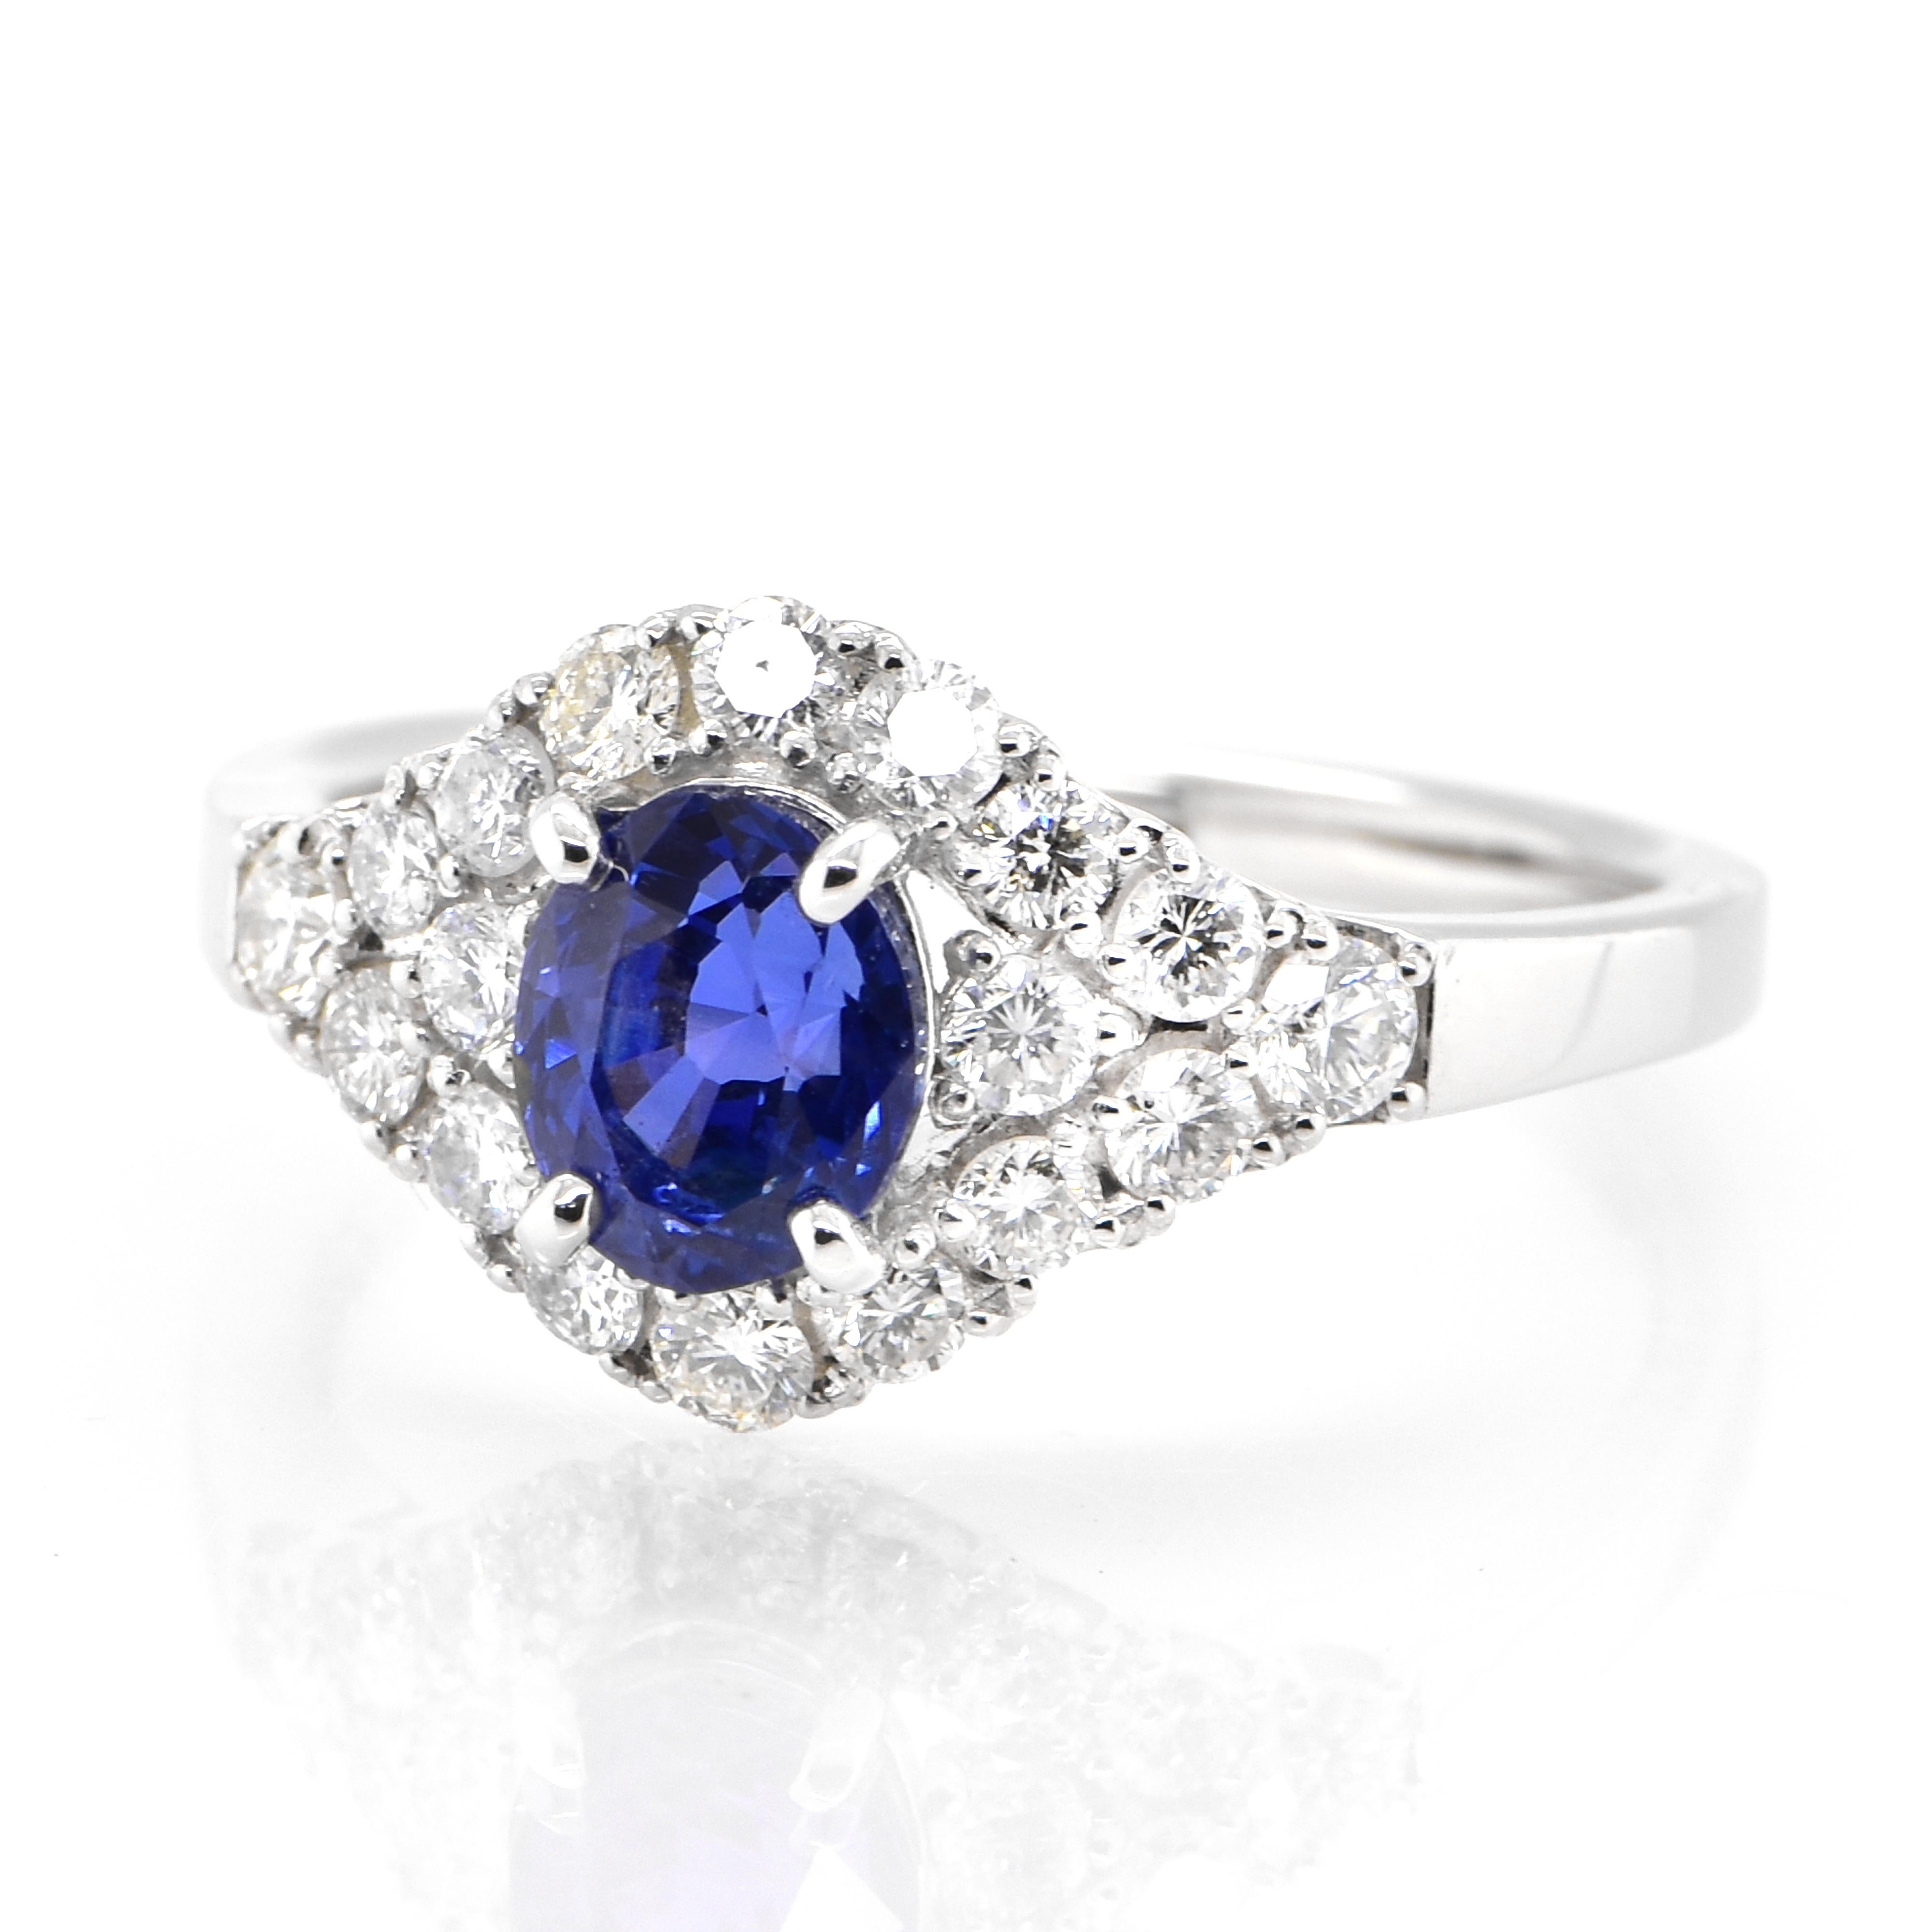 A beautiful ring featuring 1.25 Carat Natural, Unheated, Burmese Blue Sapphire and 0.55 Carats Diamond Accents set in Platinum. Sapphires have extraordinary durability - they excel in hardness as well as toughness and durability making them very